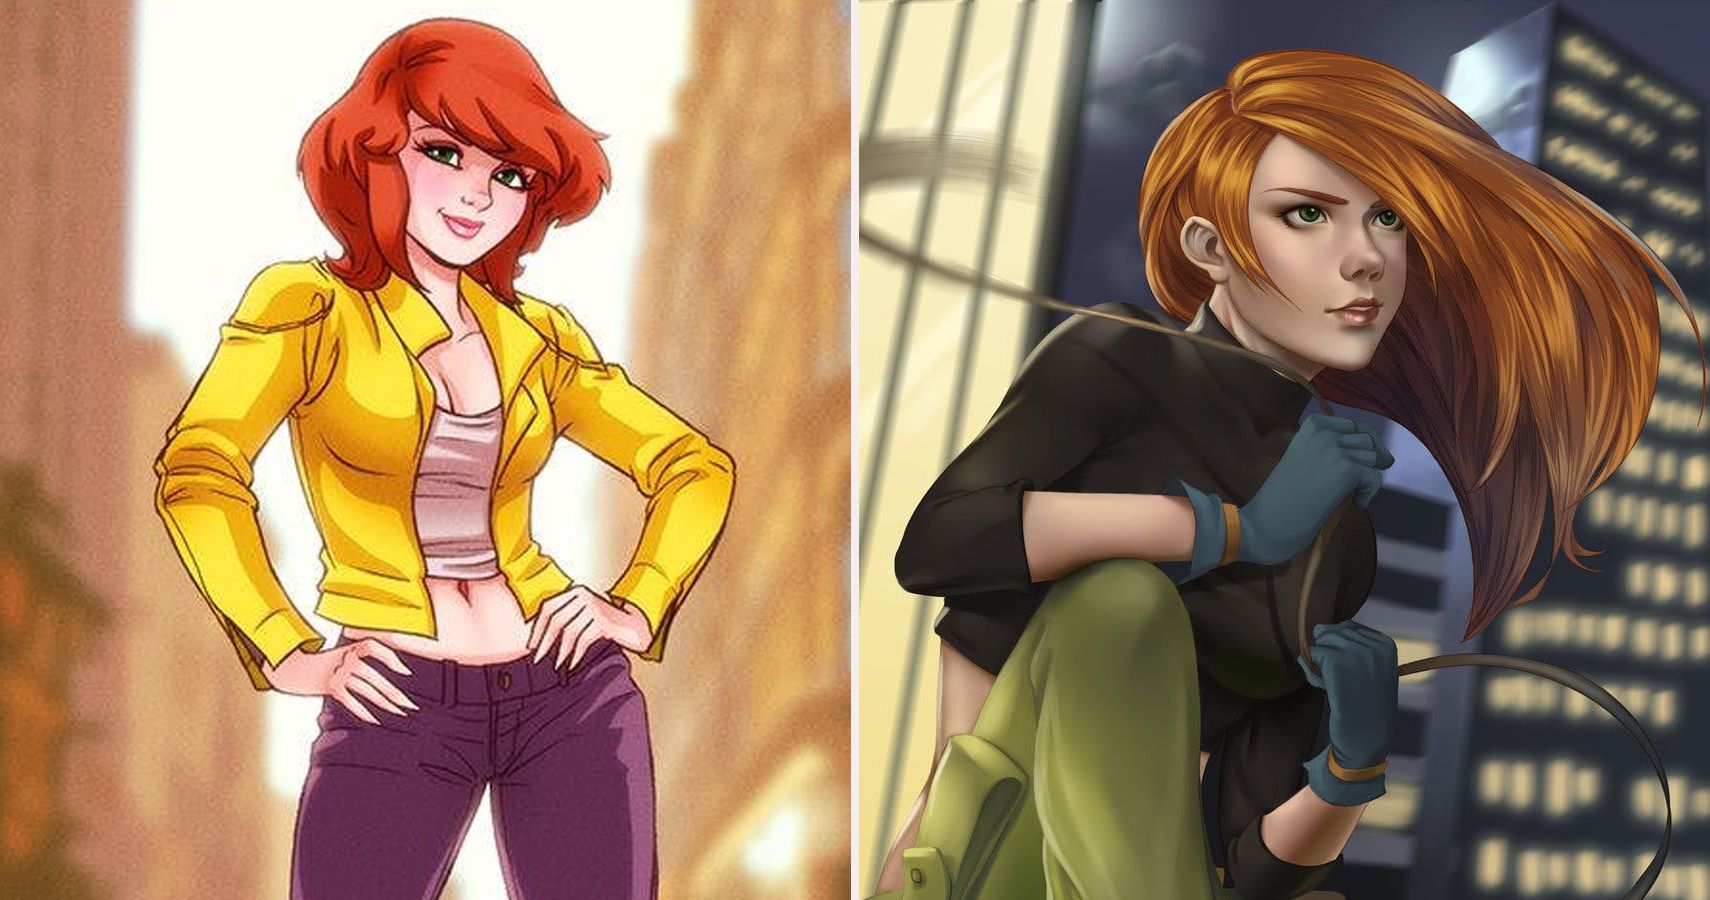 25 Cartoon Characters From The 90s That Look Amazing Now